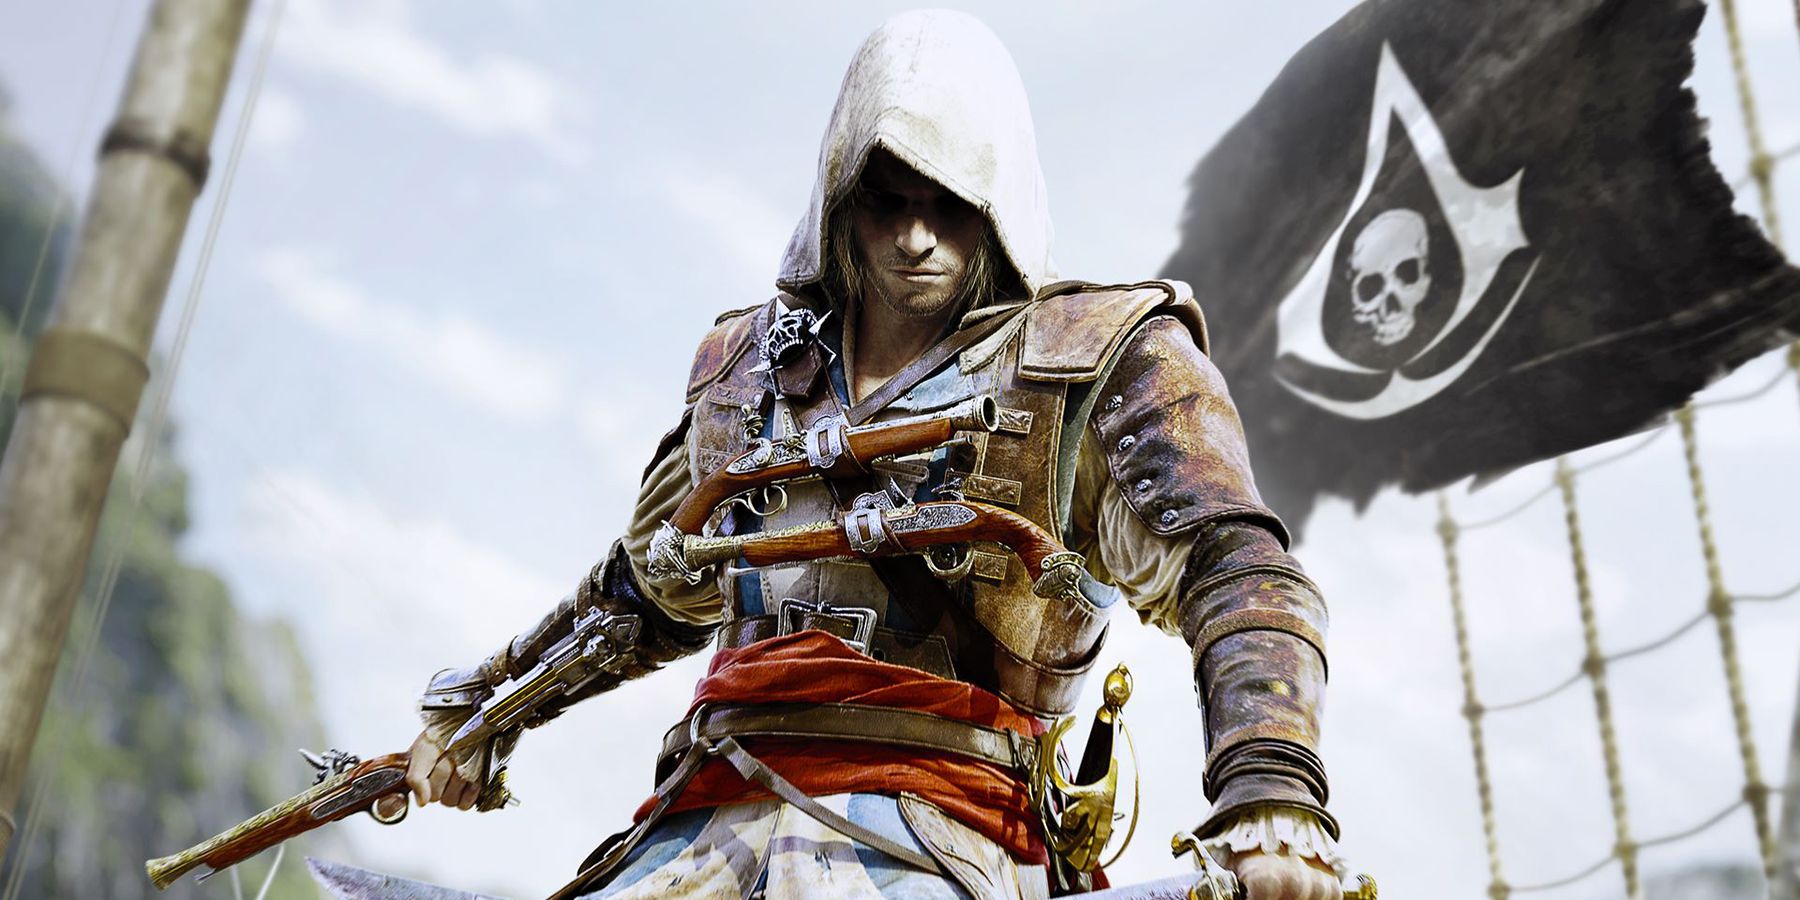 Assassin's Creed Black Flag protagonist Edward Kenway wielding a pistol in front of a pirate flag.